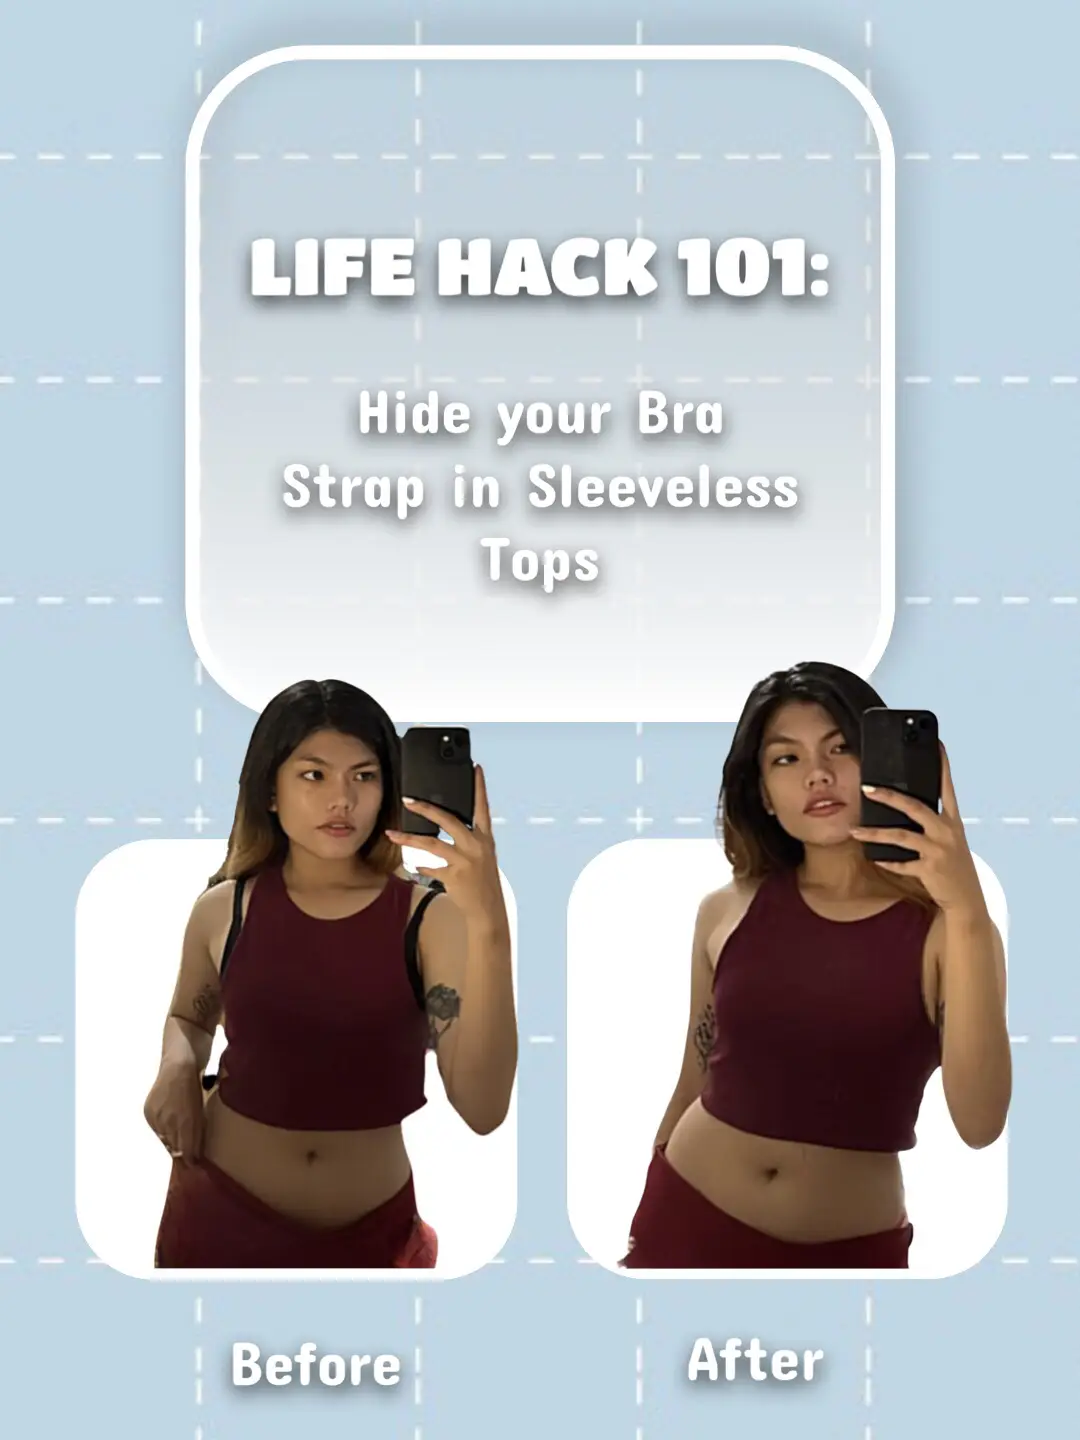 I'm a fashion expert - how to hide visible bra straps when wearing